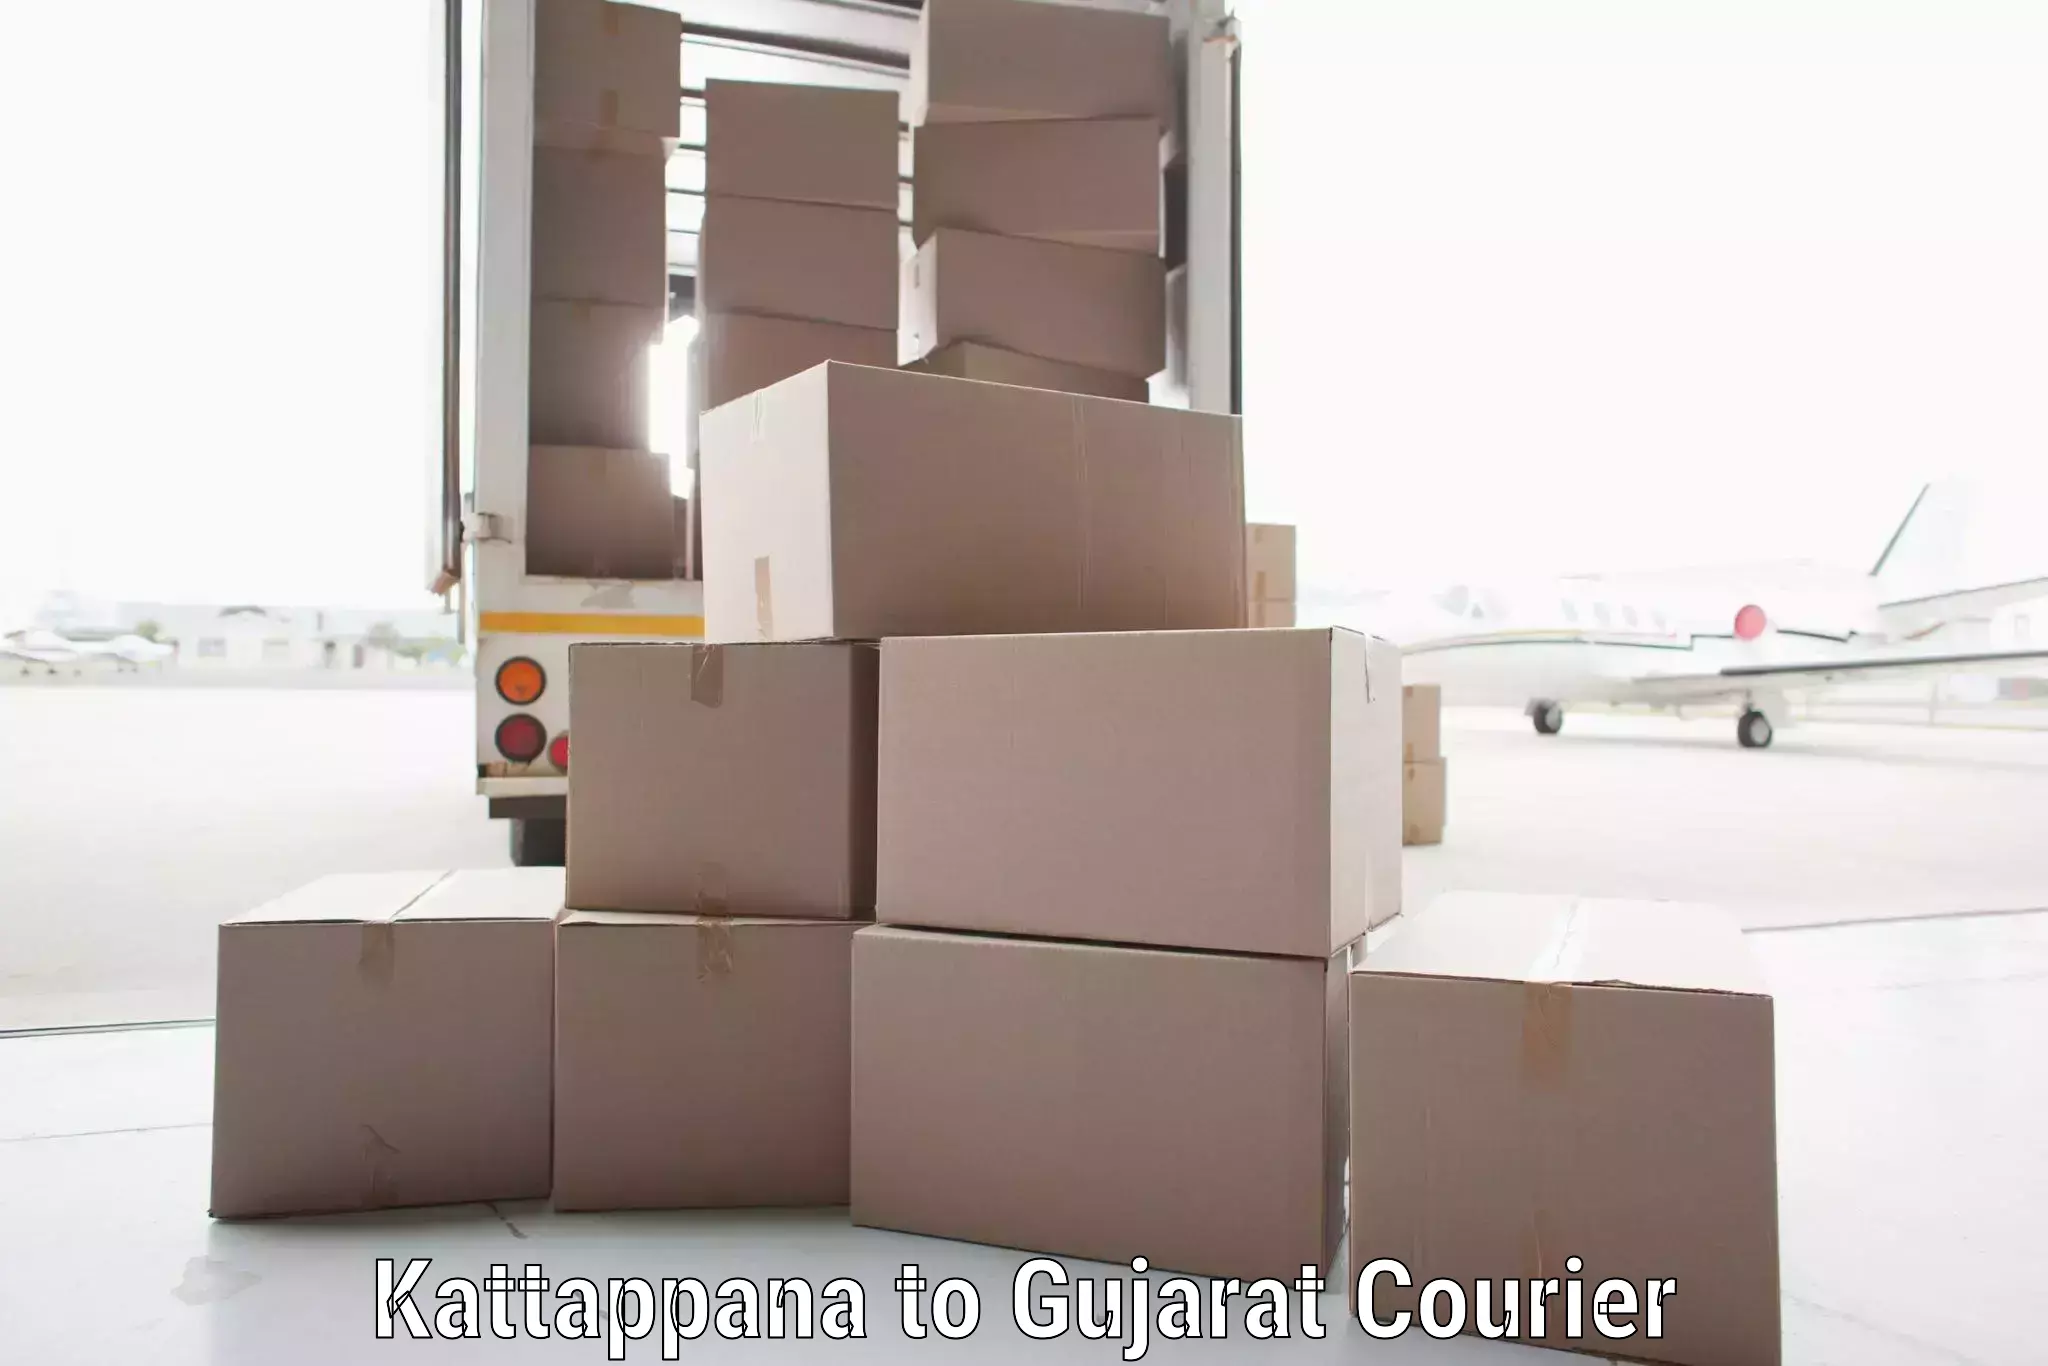 Air courier services in Kattappana to Becharaji